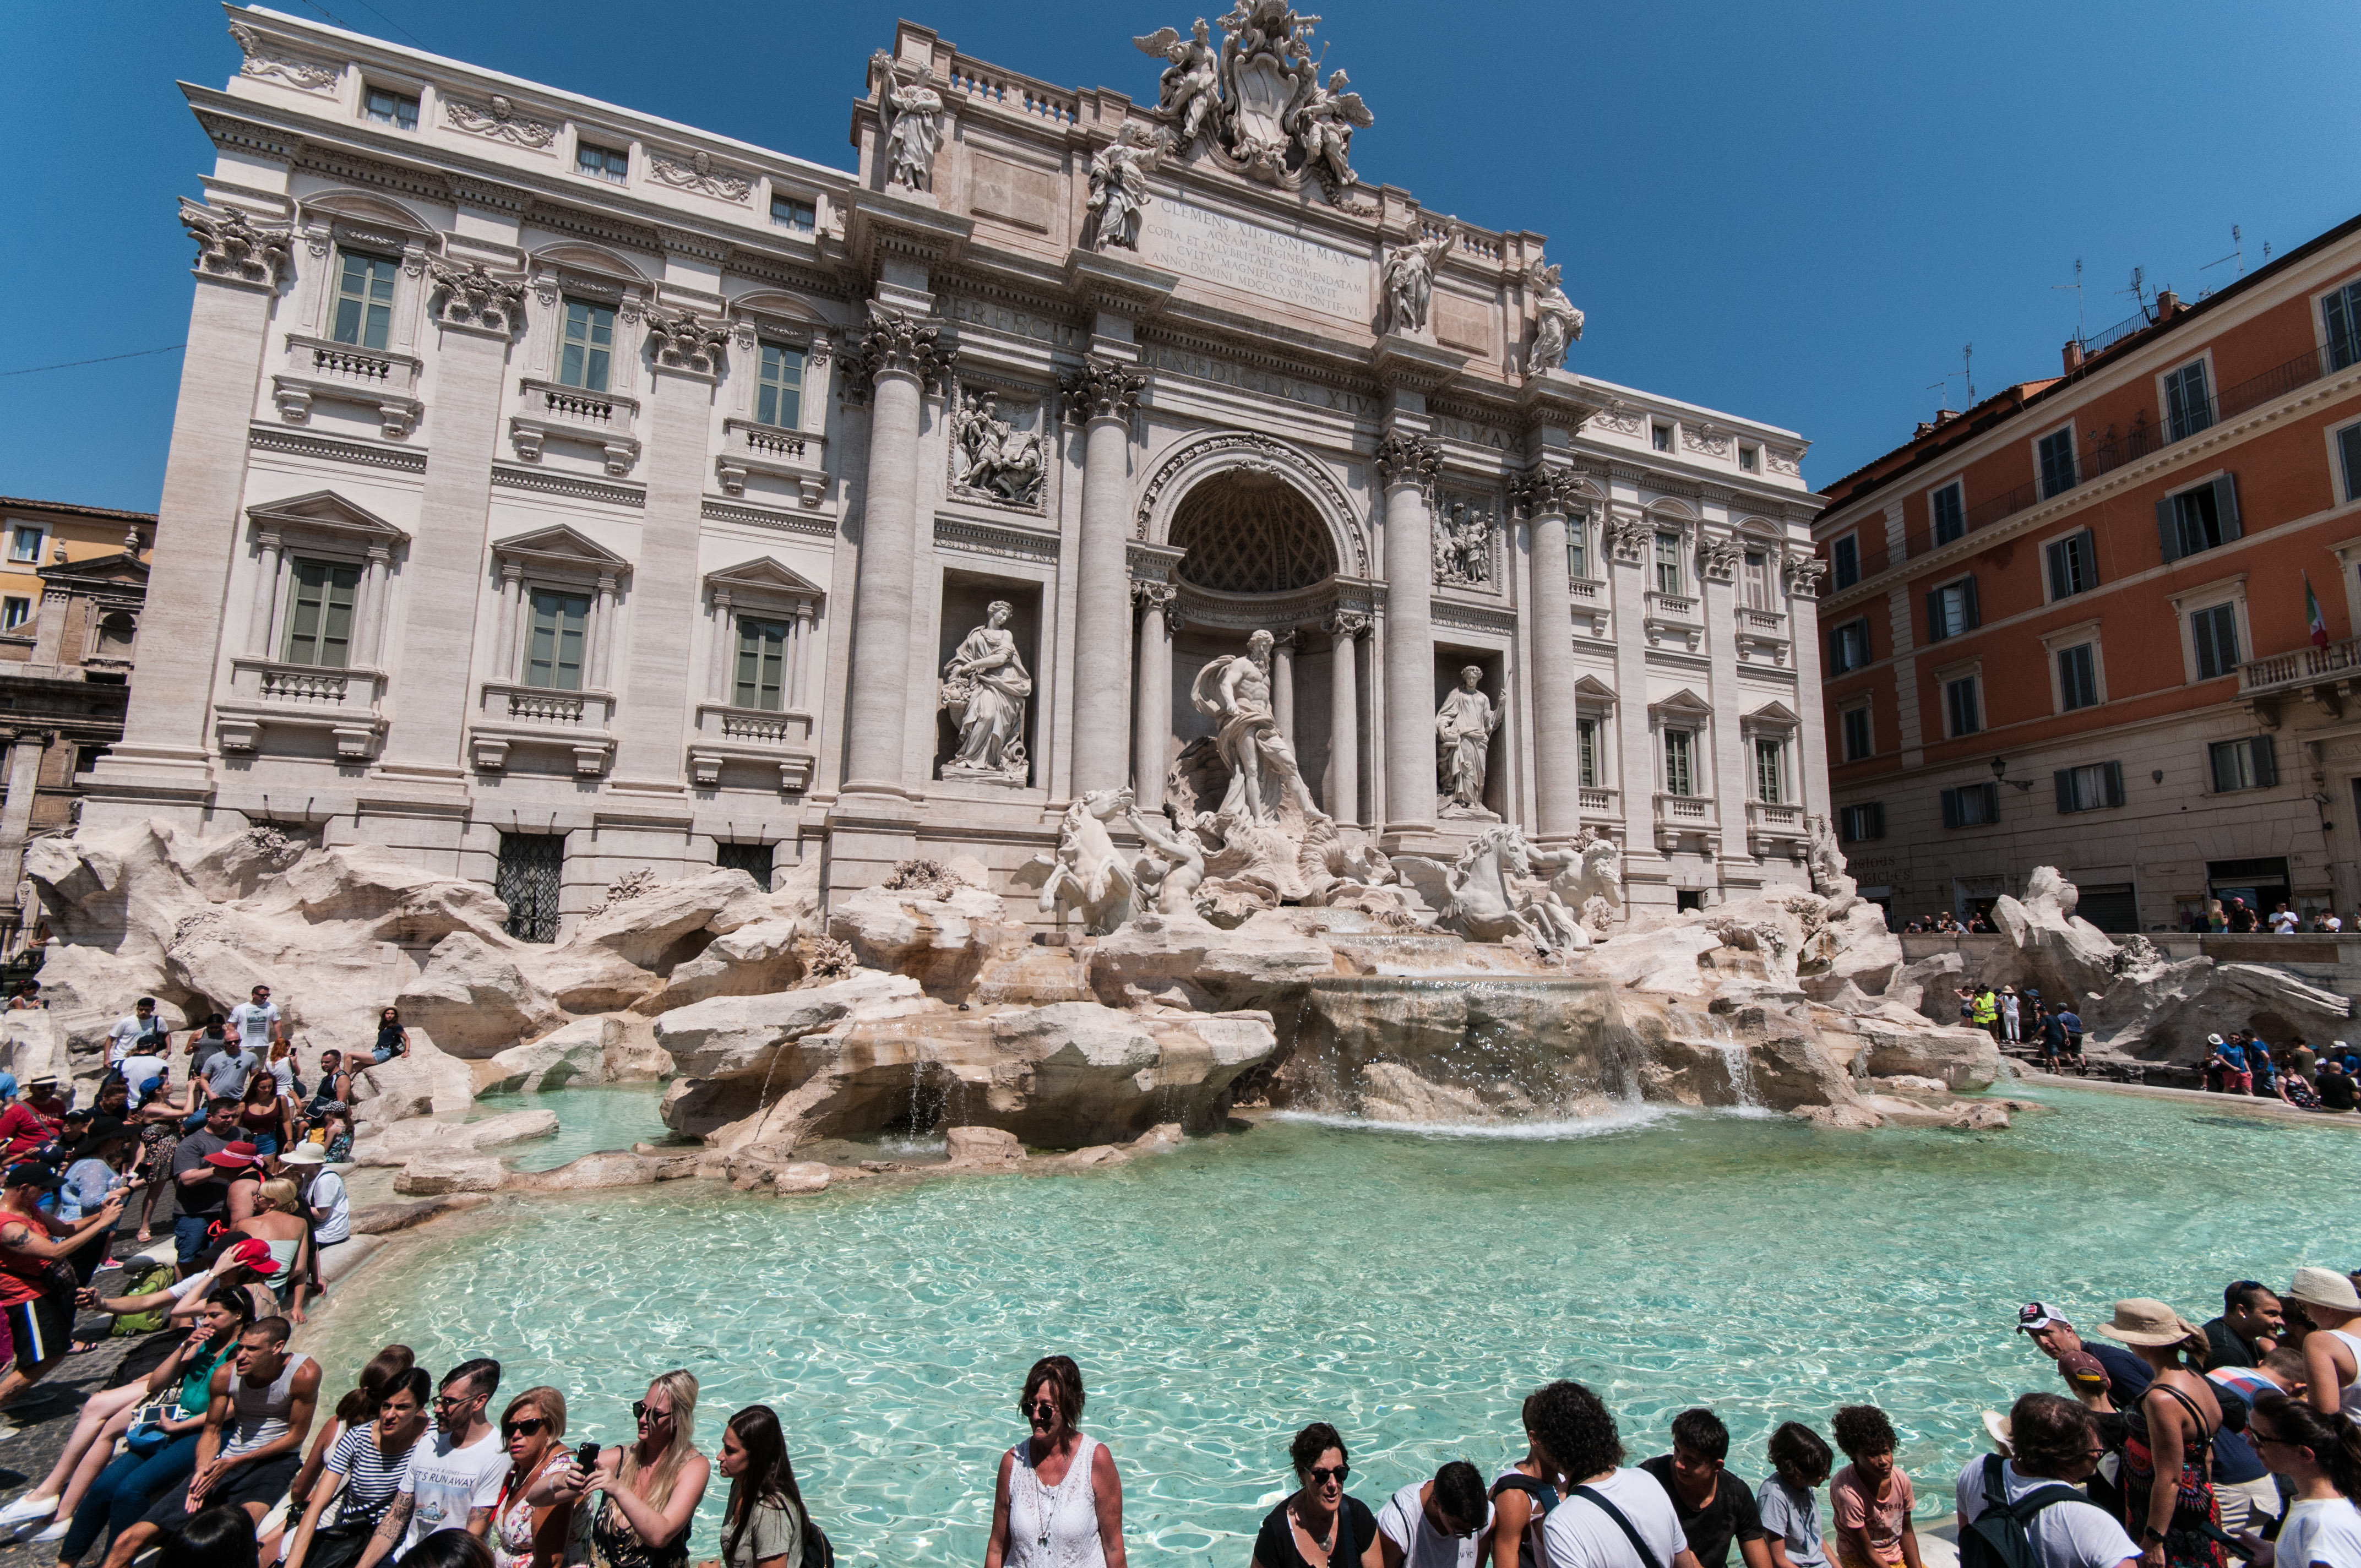 Church and Rome council in row over Trevi Fountain coins  